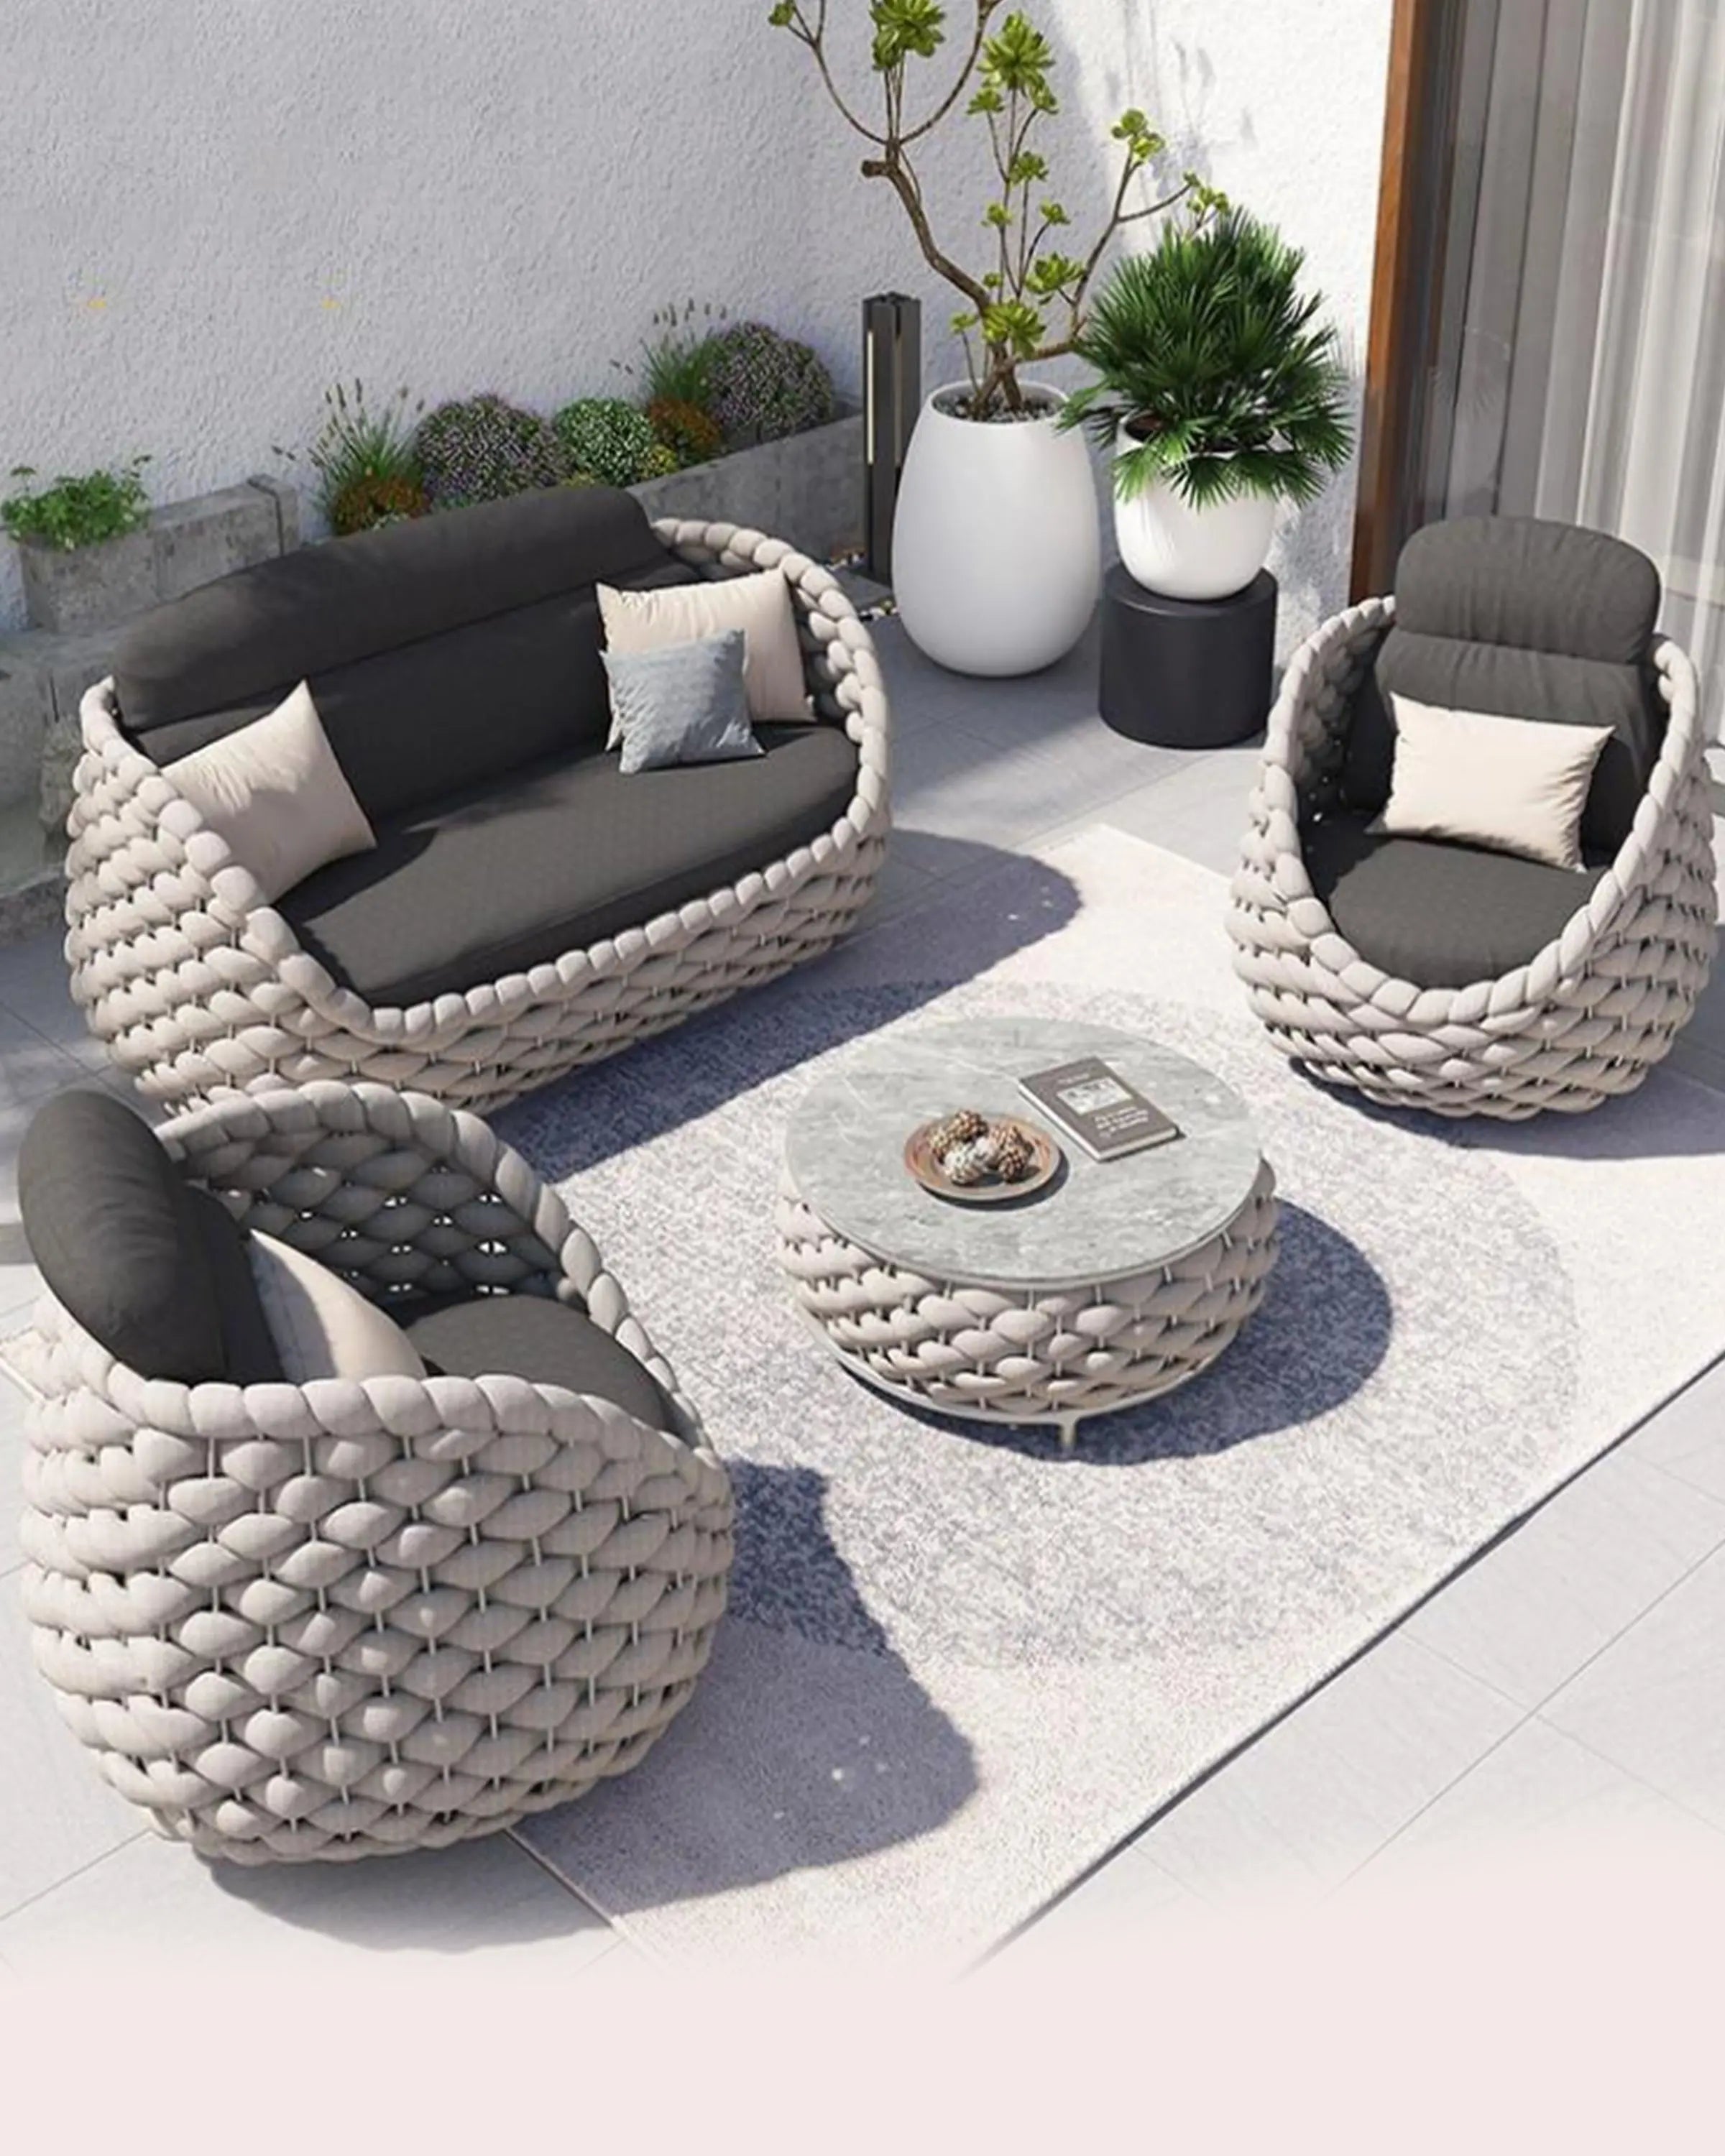 Prestonic Sofa Set - Out Door Furniture ANGIE HOMES